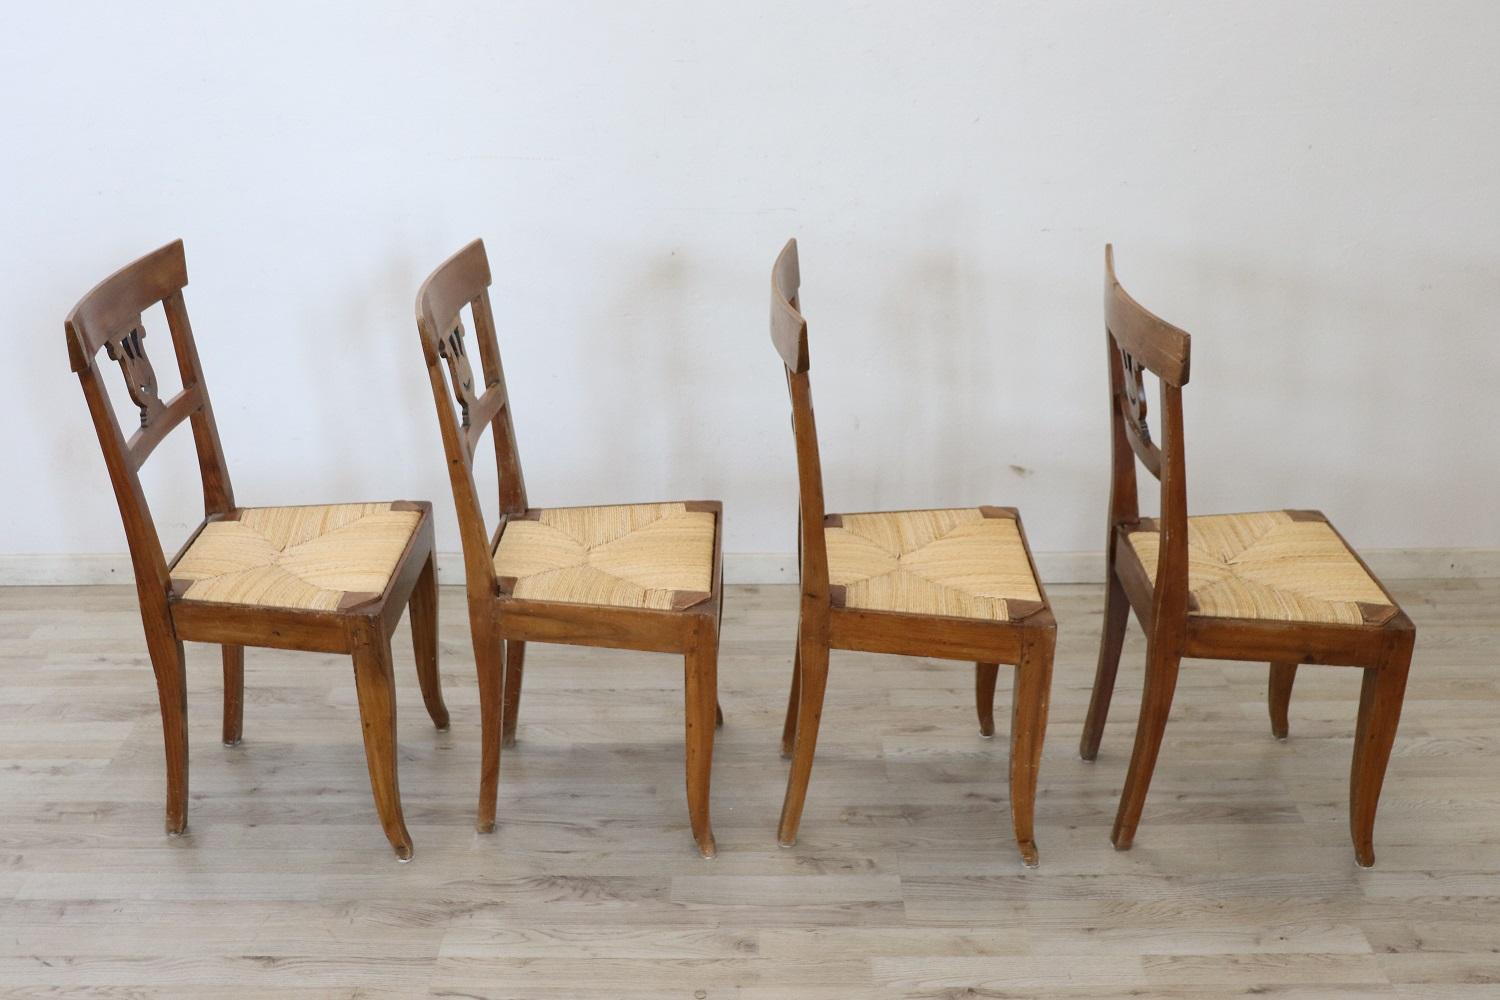 Early 19th Century Italian Empire Carved Walnut Wood Four Antique Chairs For Sale 6